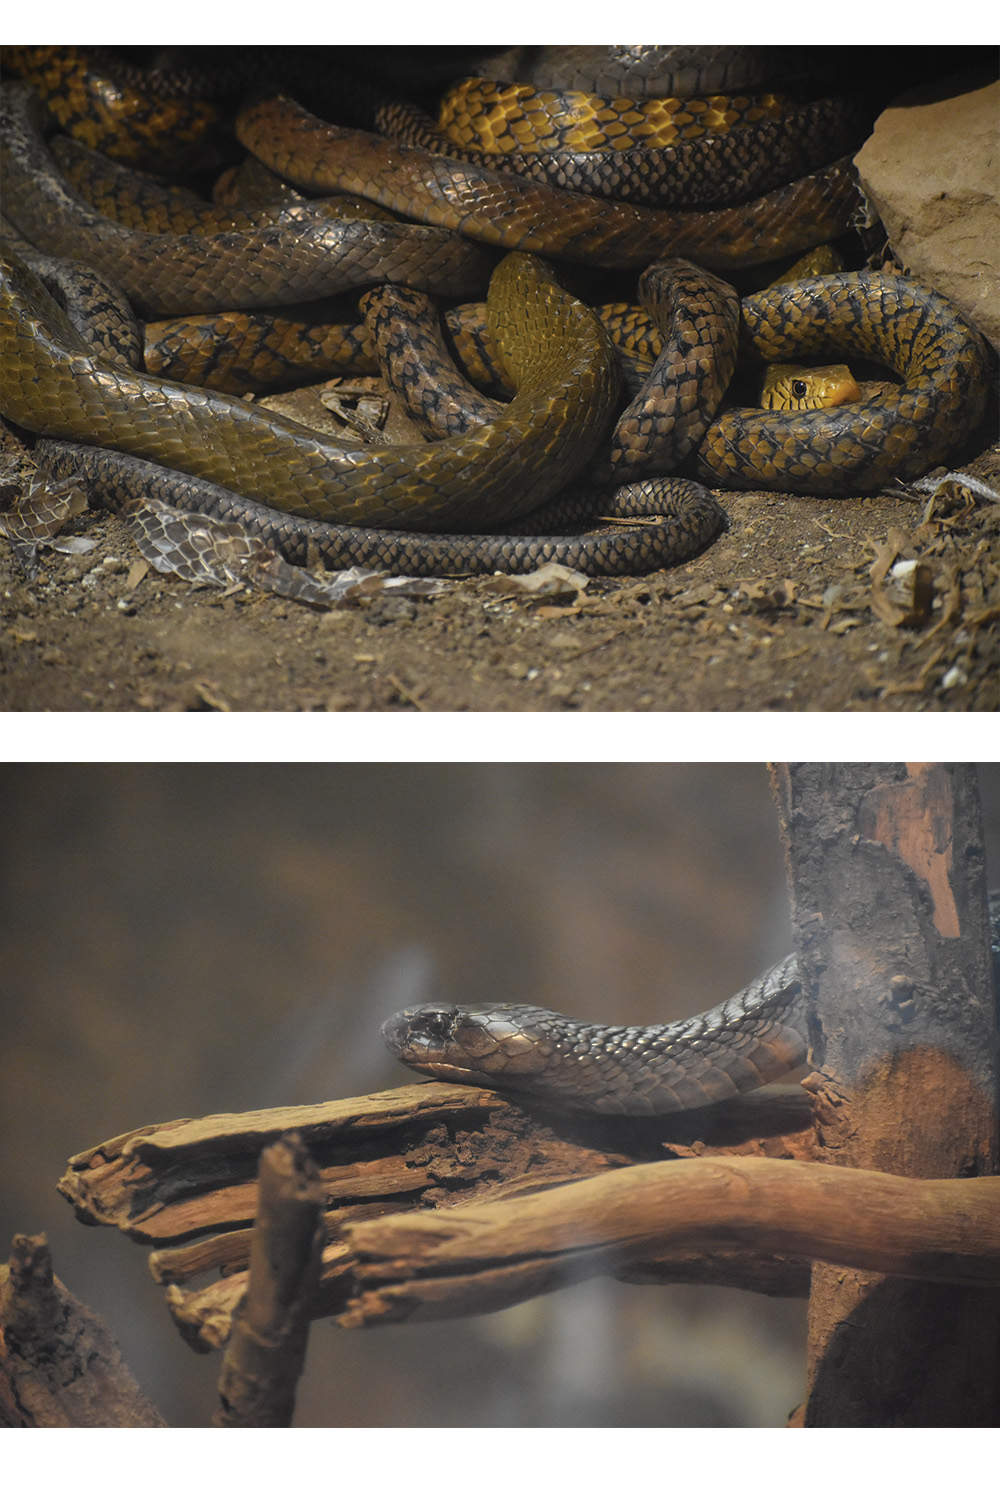 SNAKE PHOTOGRAPHY pinterest preview image.